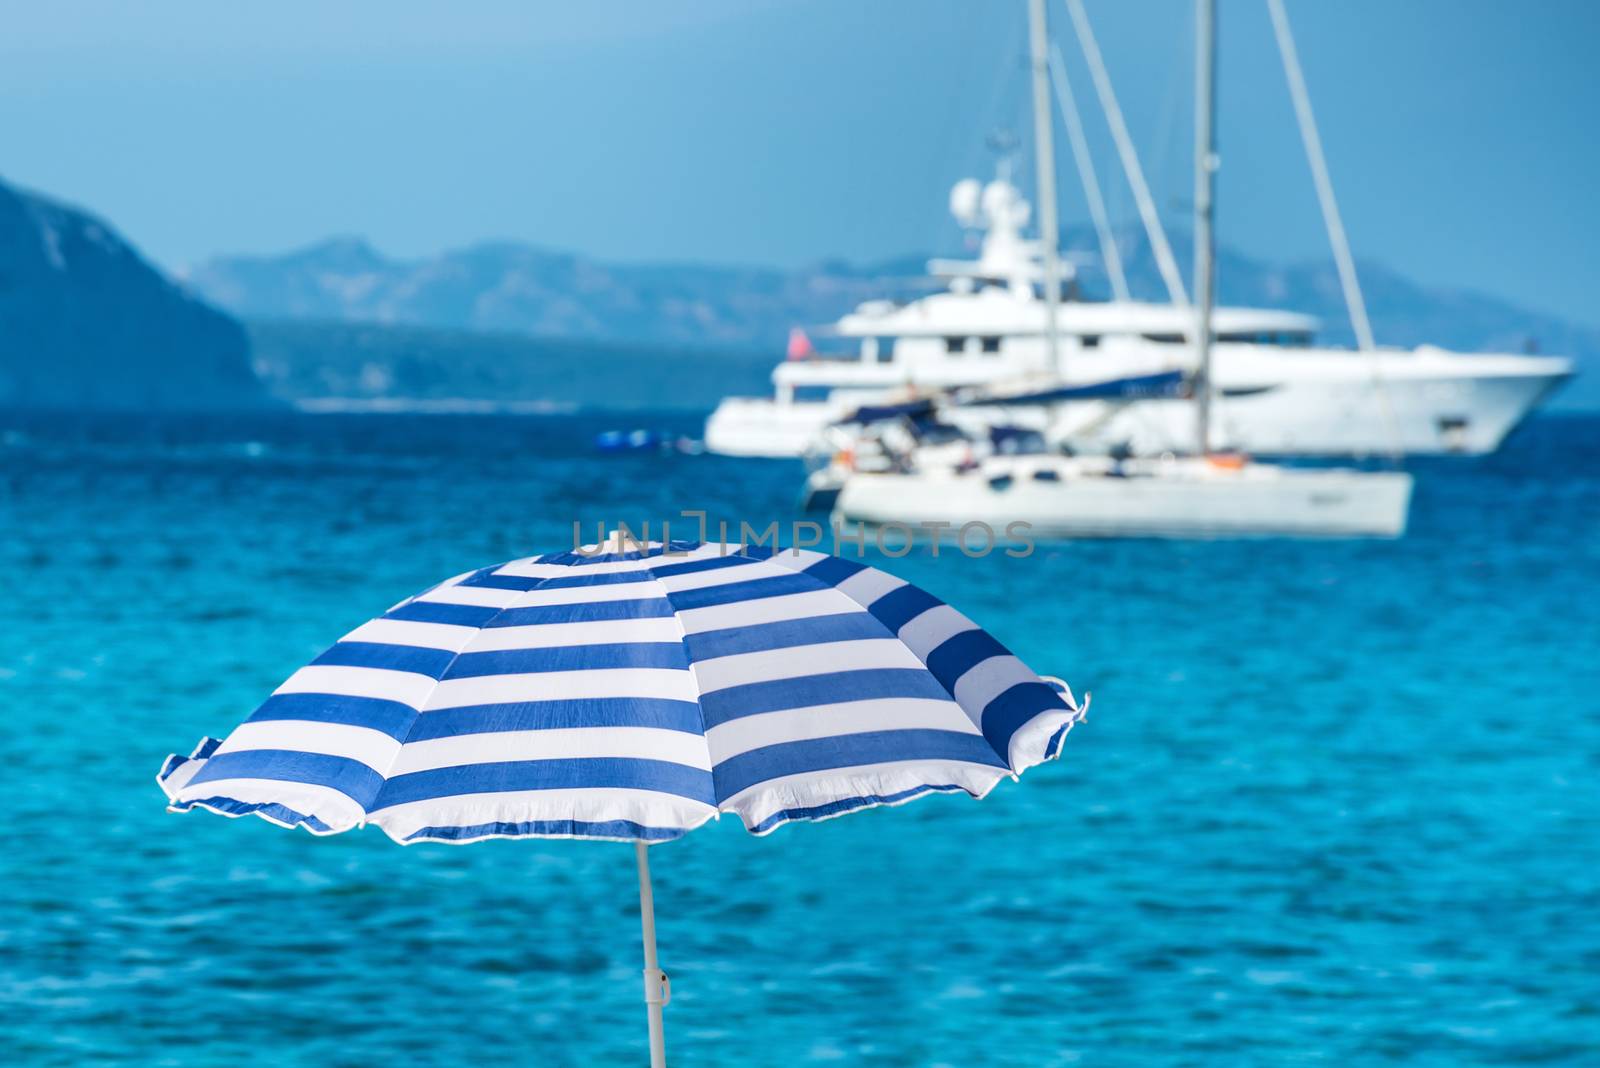 Colorful umbrellas on the tropical beach with blue sea and yachts as background